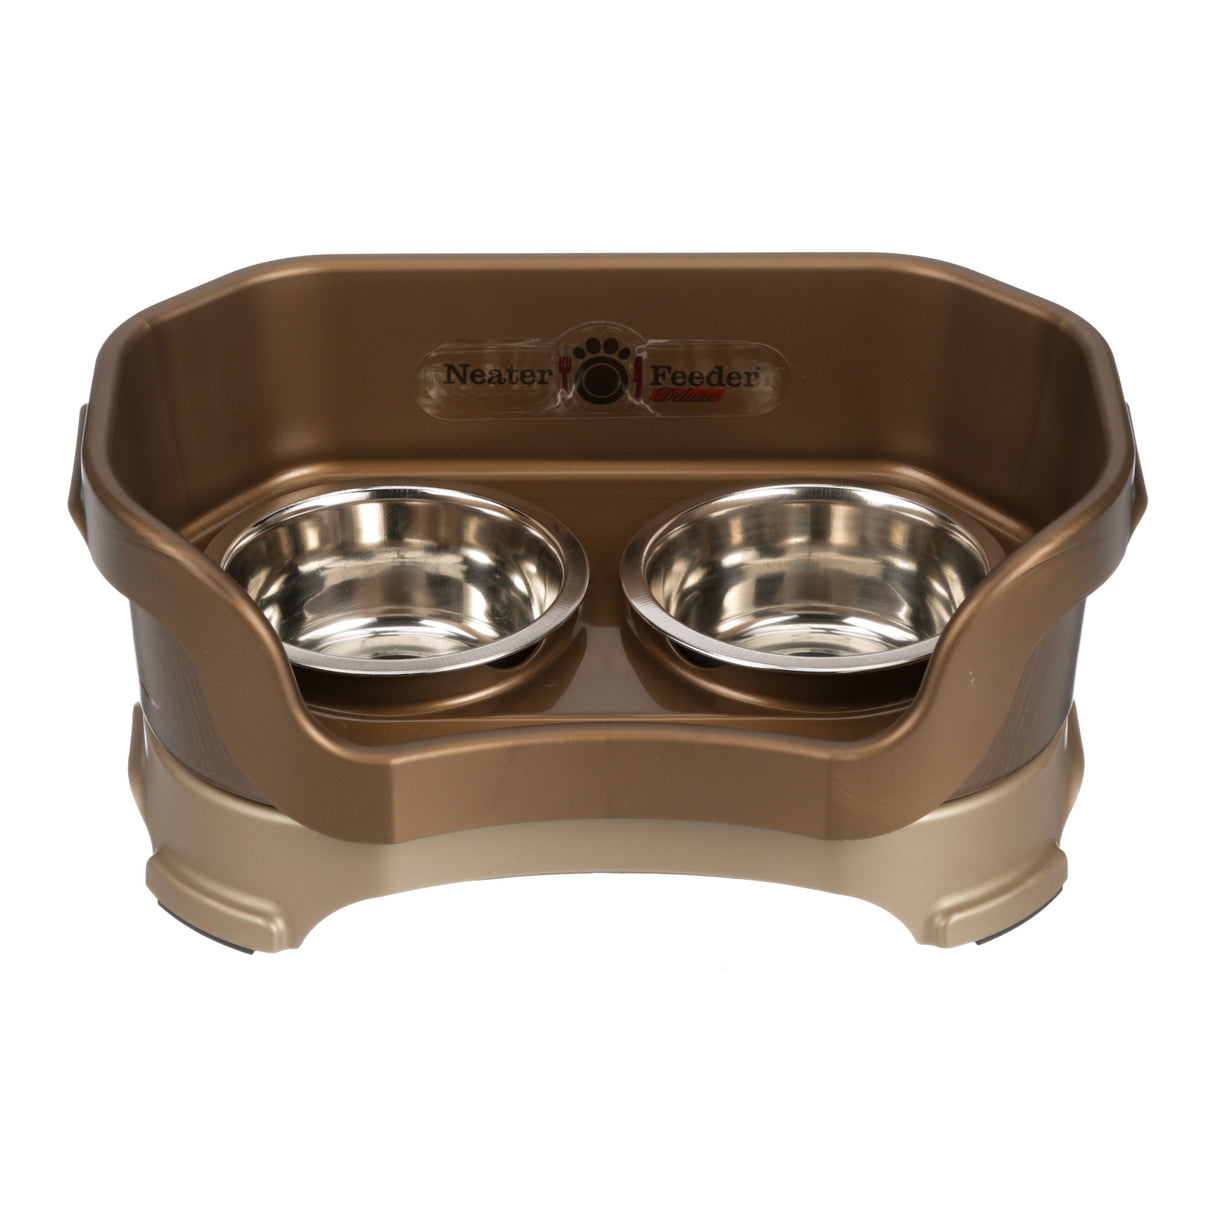 Deluxe Small Dog Bronze raised Neater Feeder Dog Bowls